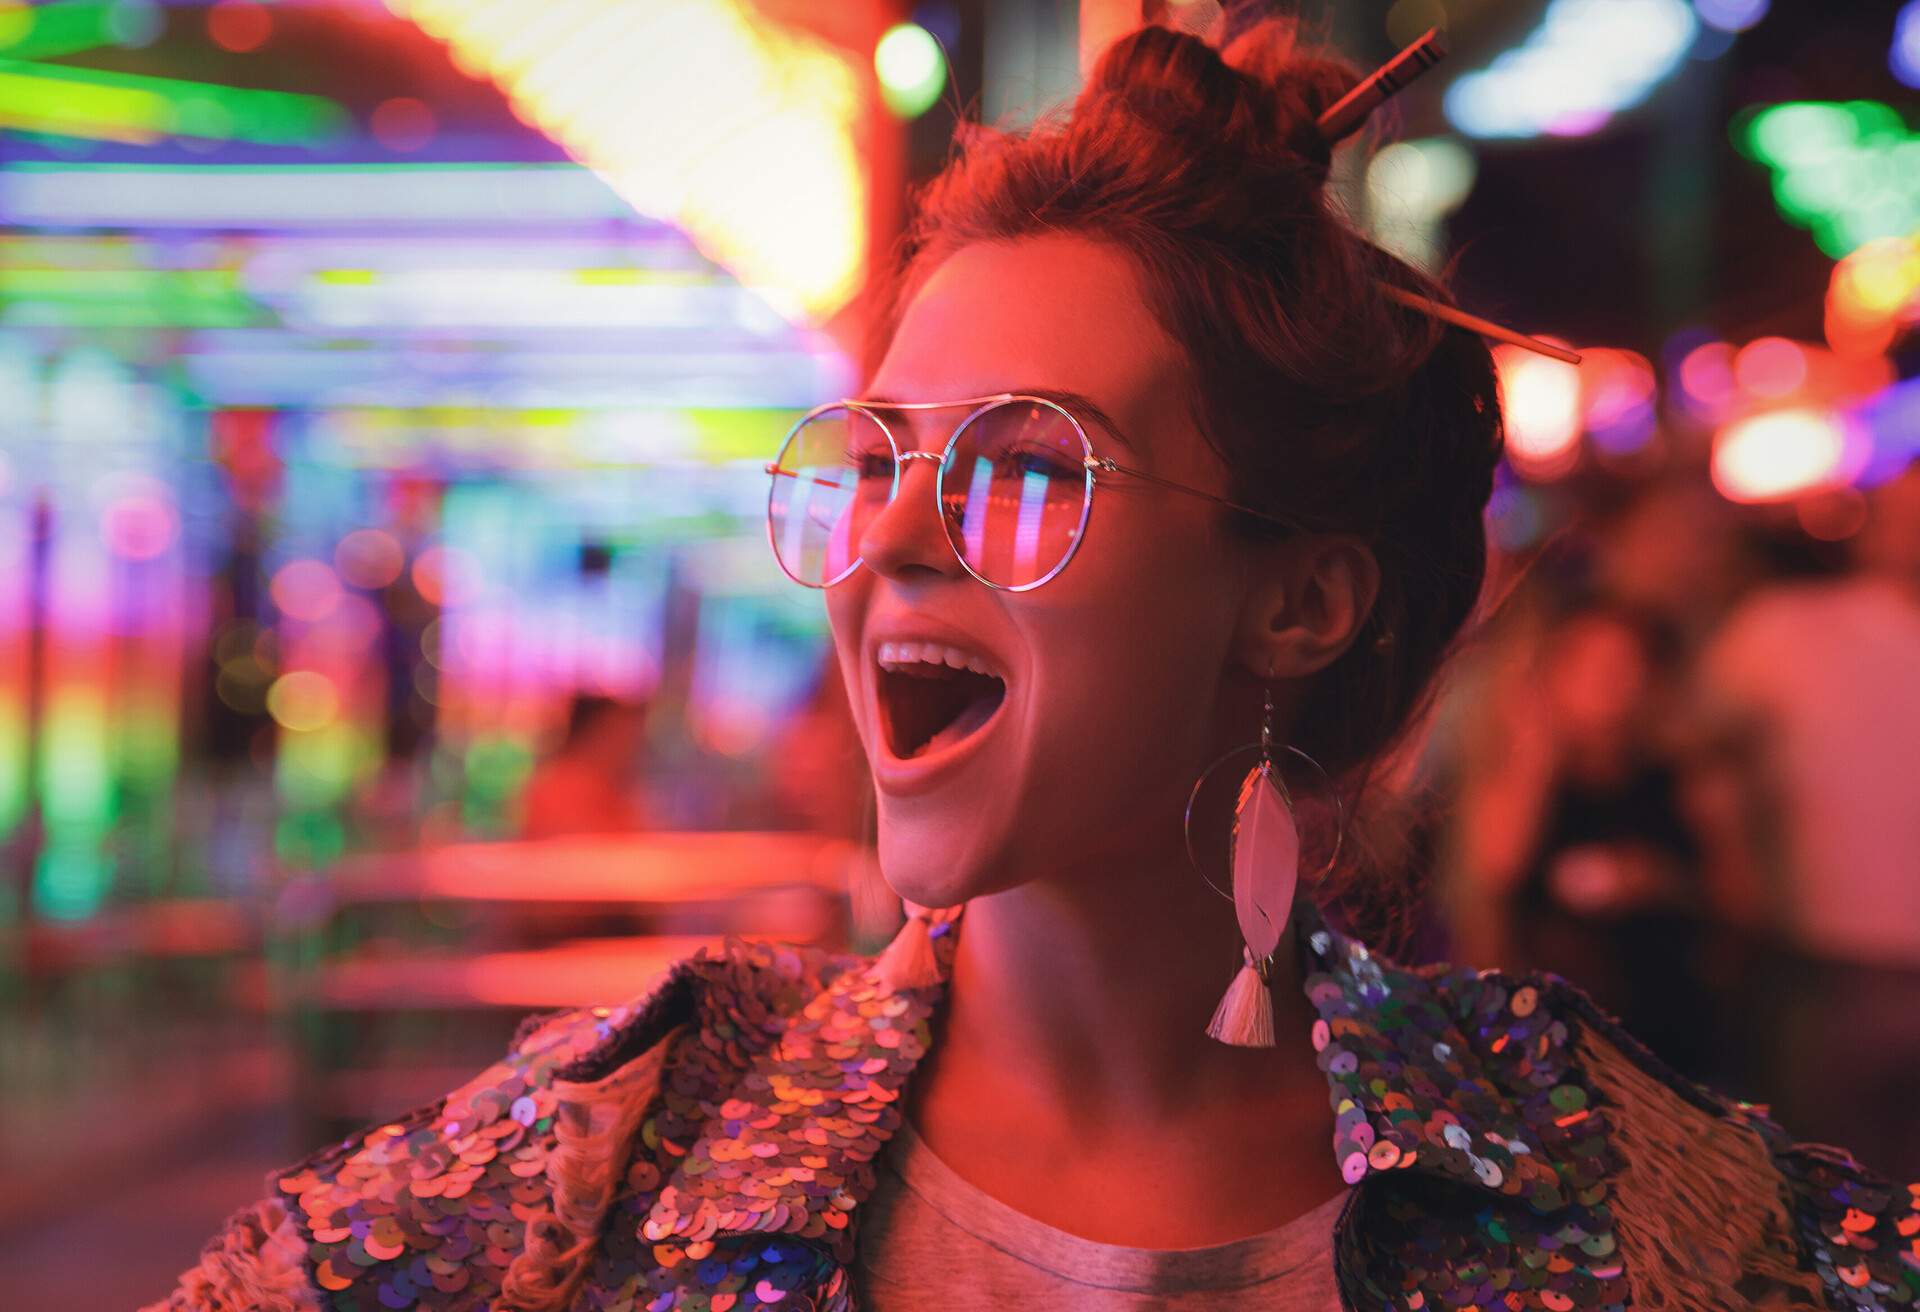 A portrait of a happy woman in a sparkling sequence jacket on the street with colourful lights.